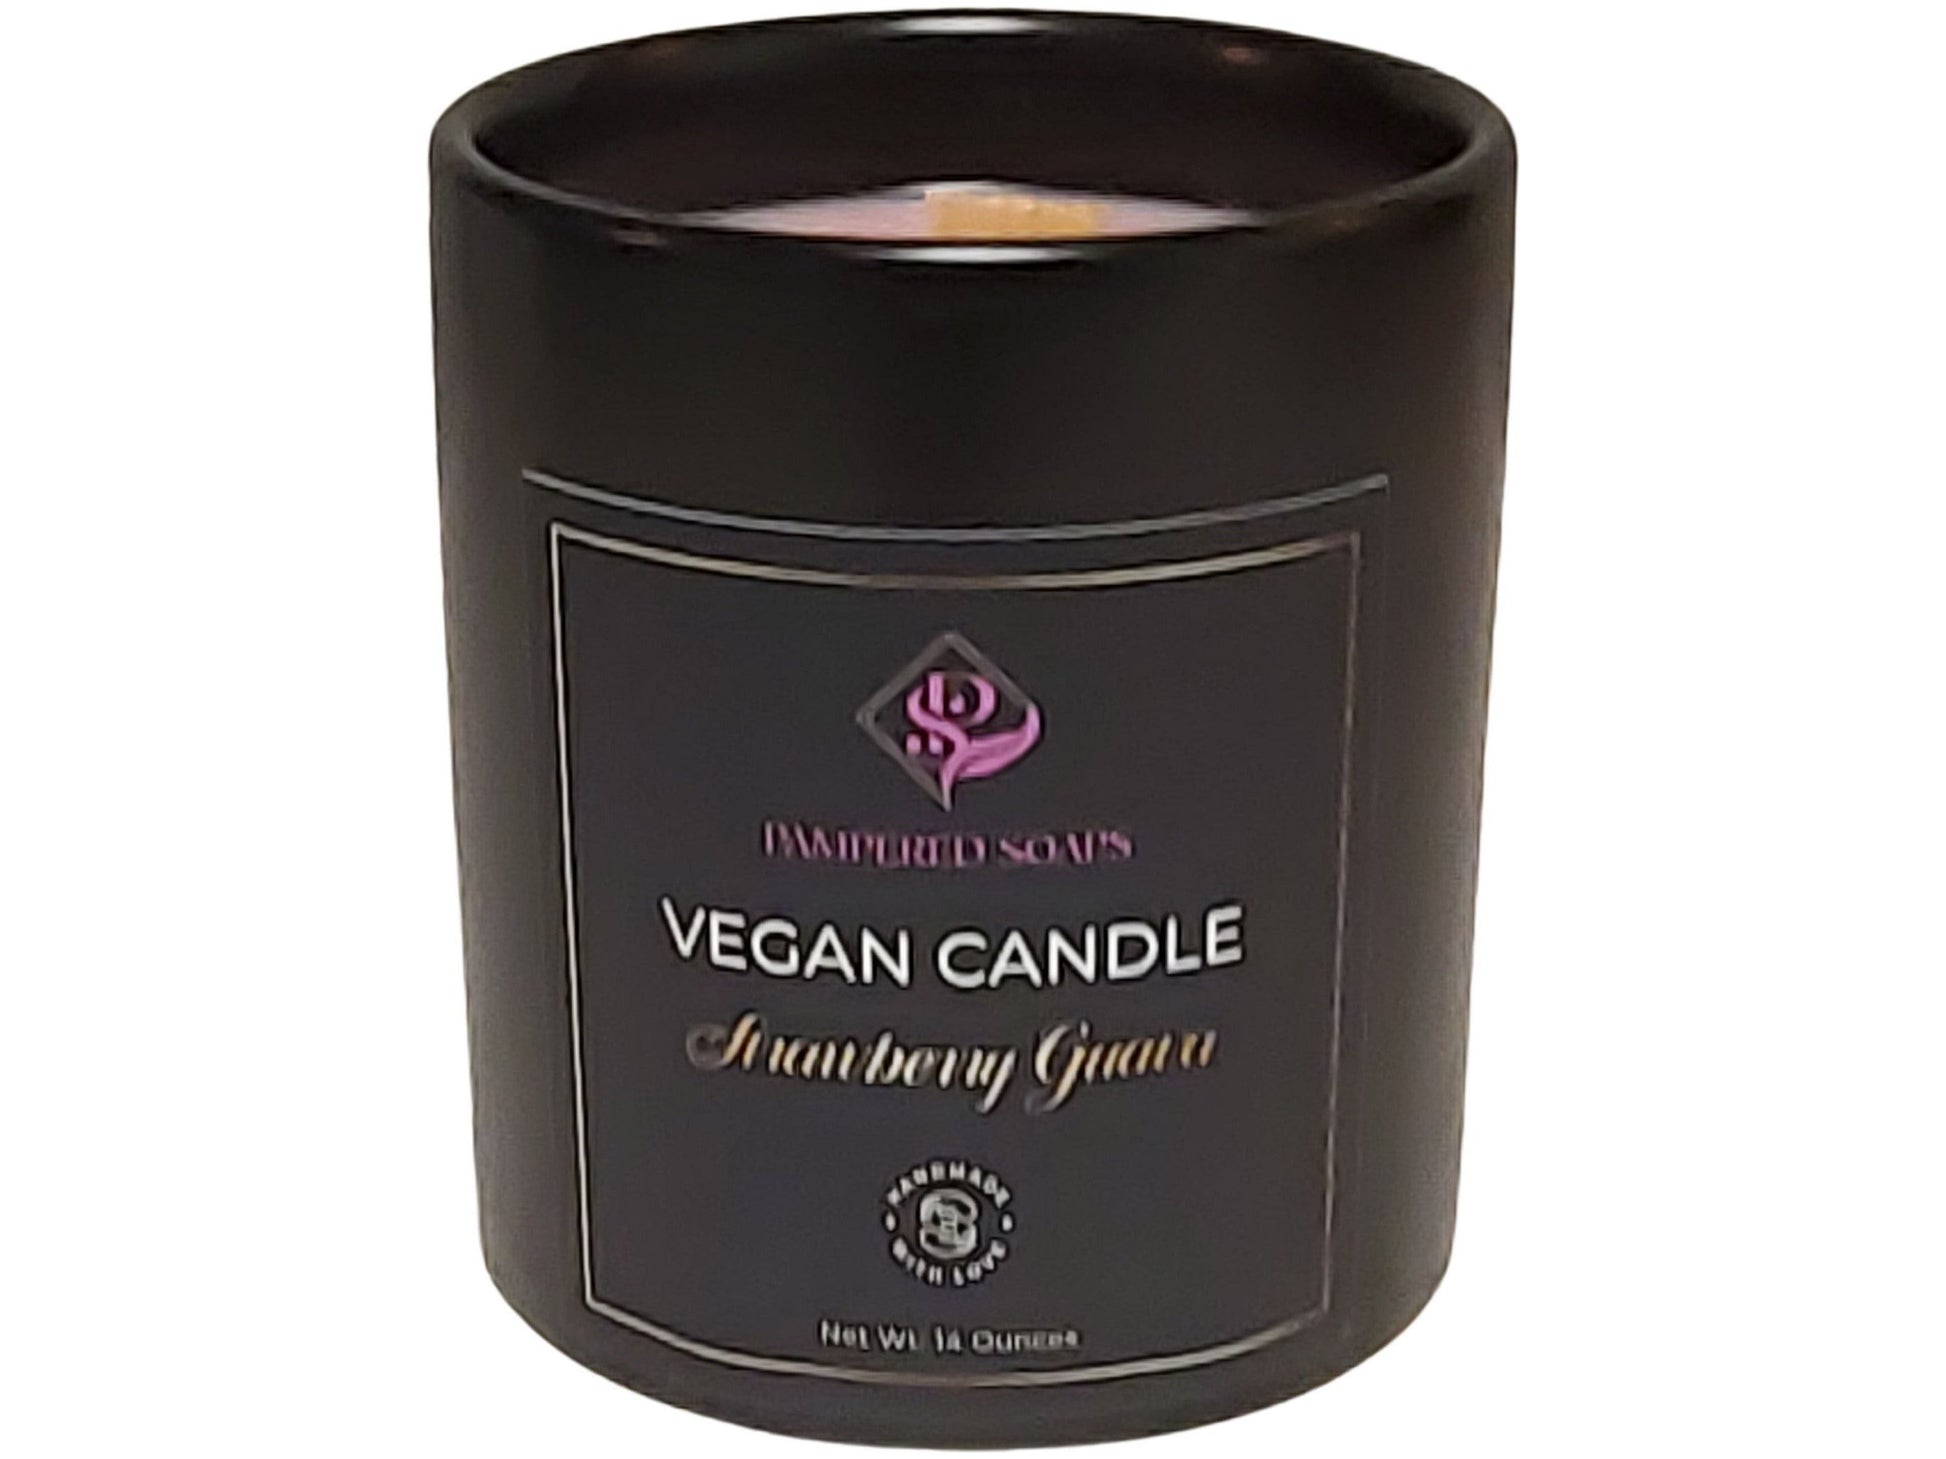 Strawberry Guava Vegan Aromatherapy Candle pampered soaps